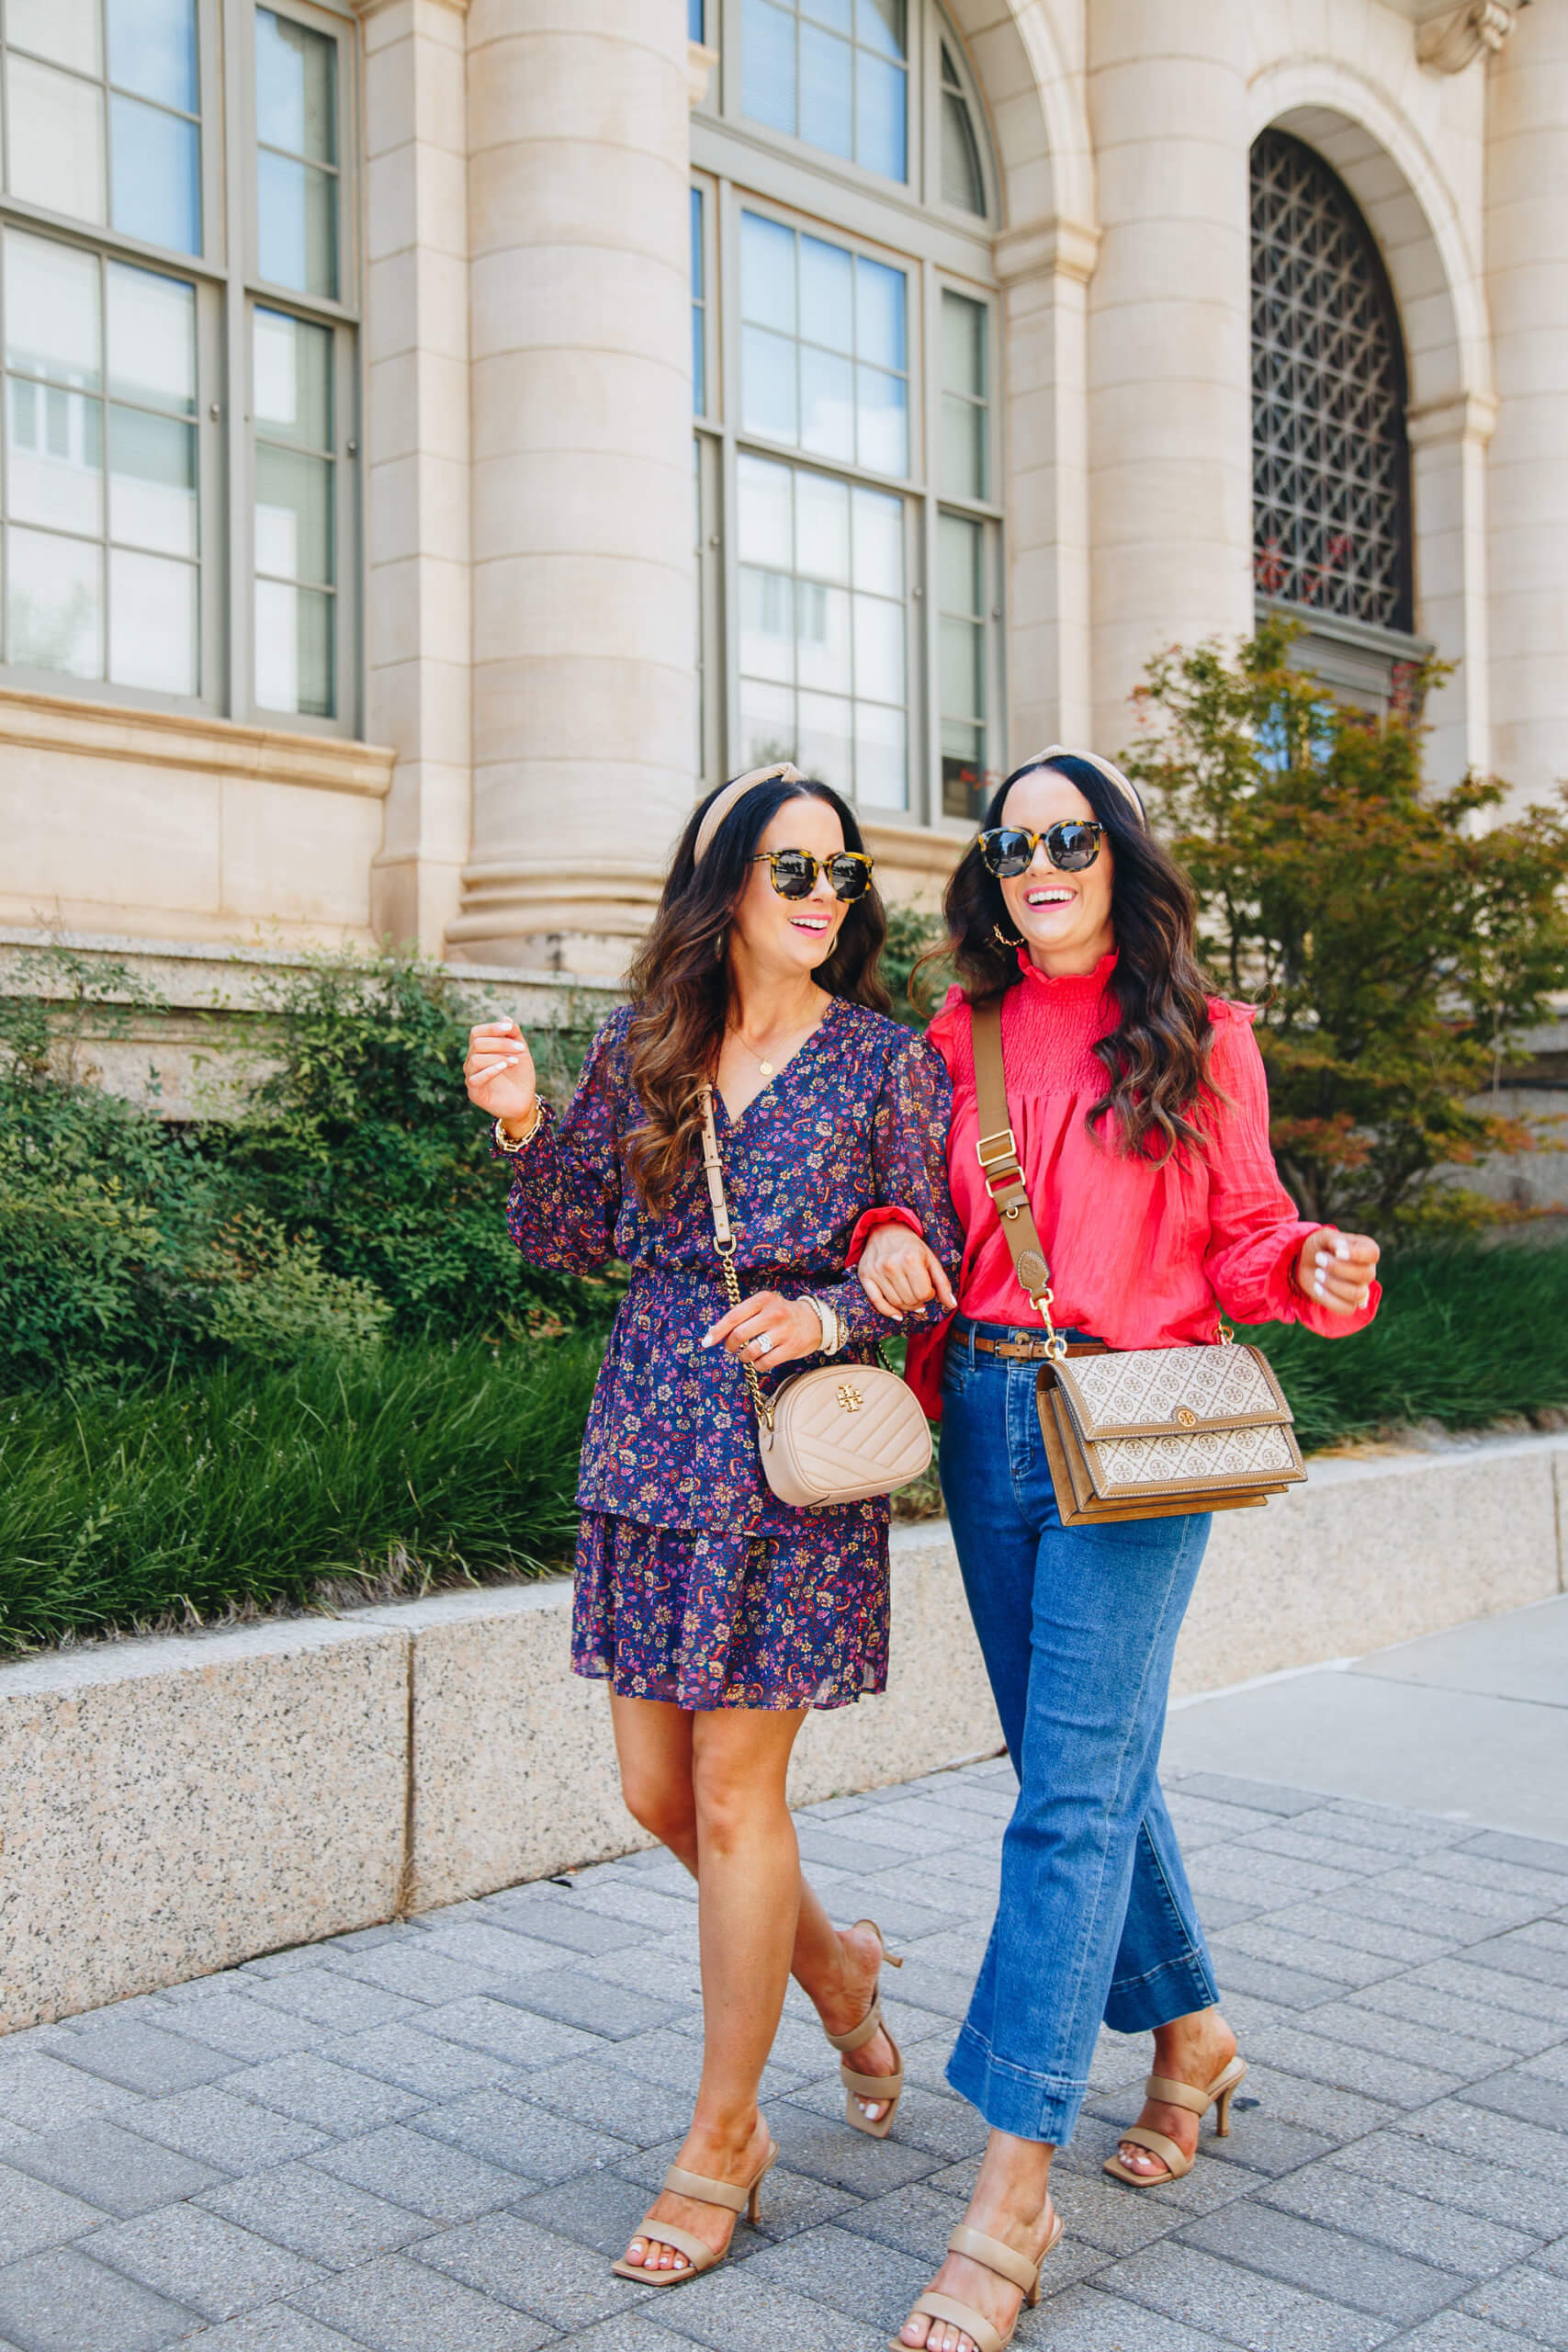 Fall Fashion Finds, New Tory Burch Bags + A Giftcard Promo! - The Double  Take Girls